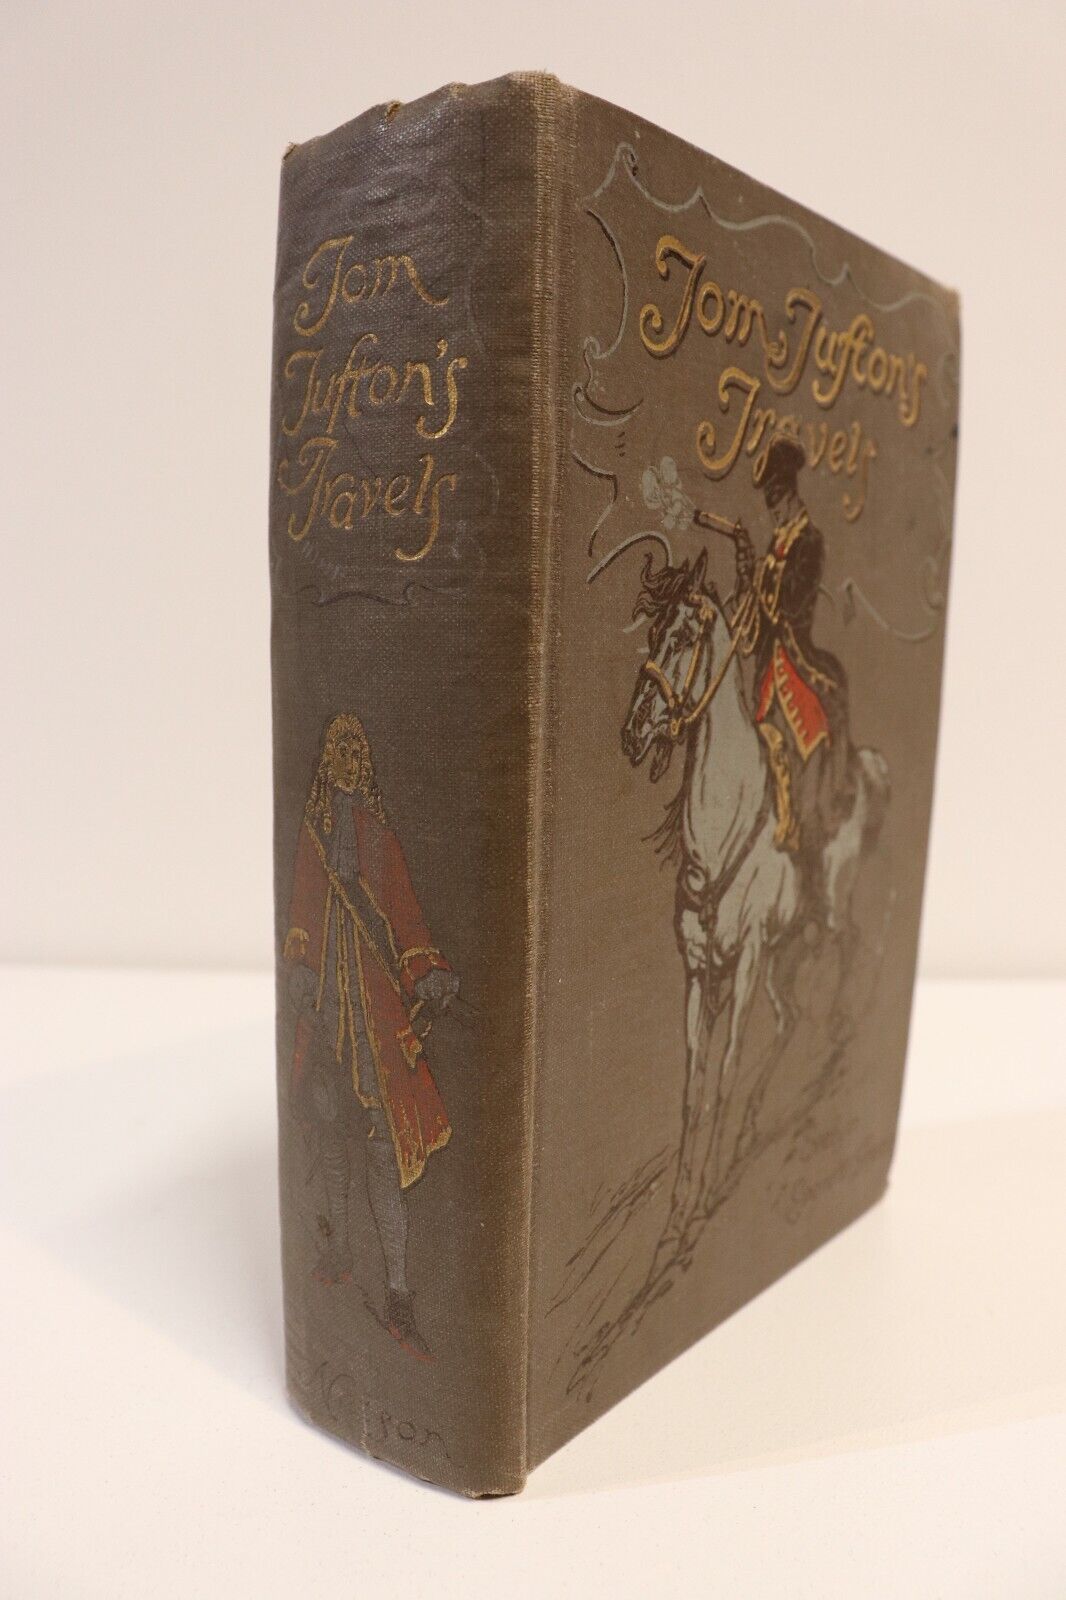 Tom Tufton's Travels by E. Everett-Green - 1907 - Antique Fiction Book